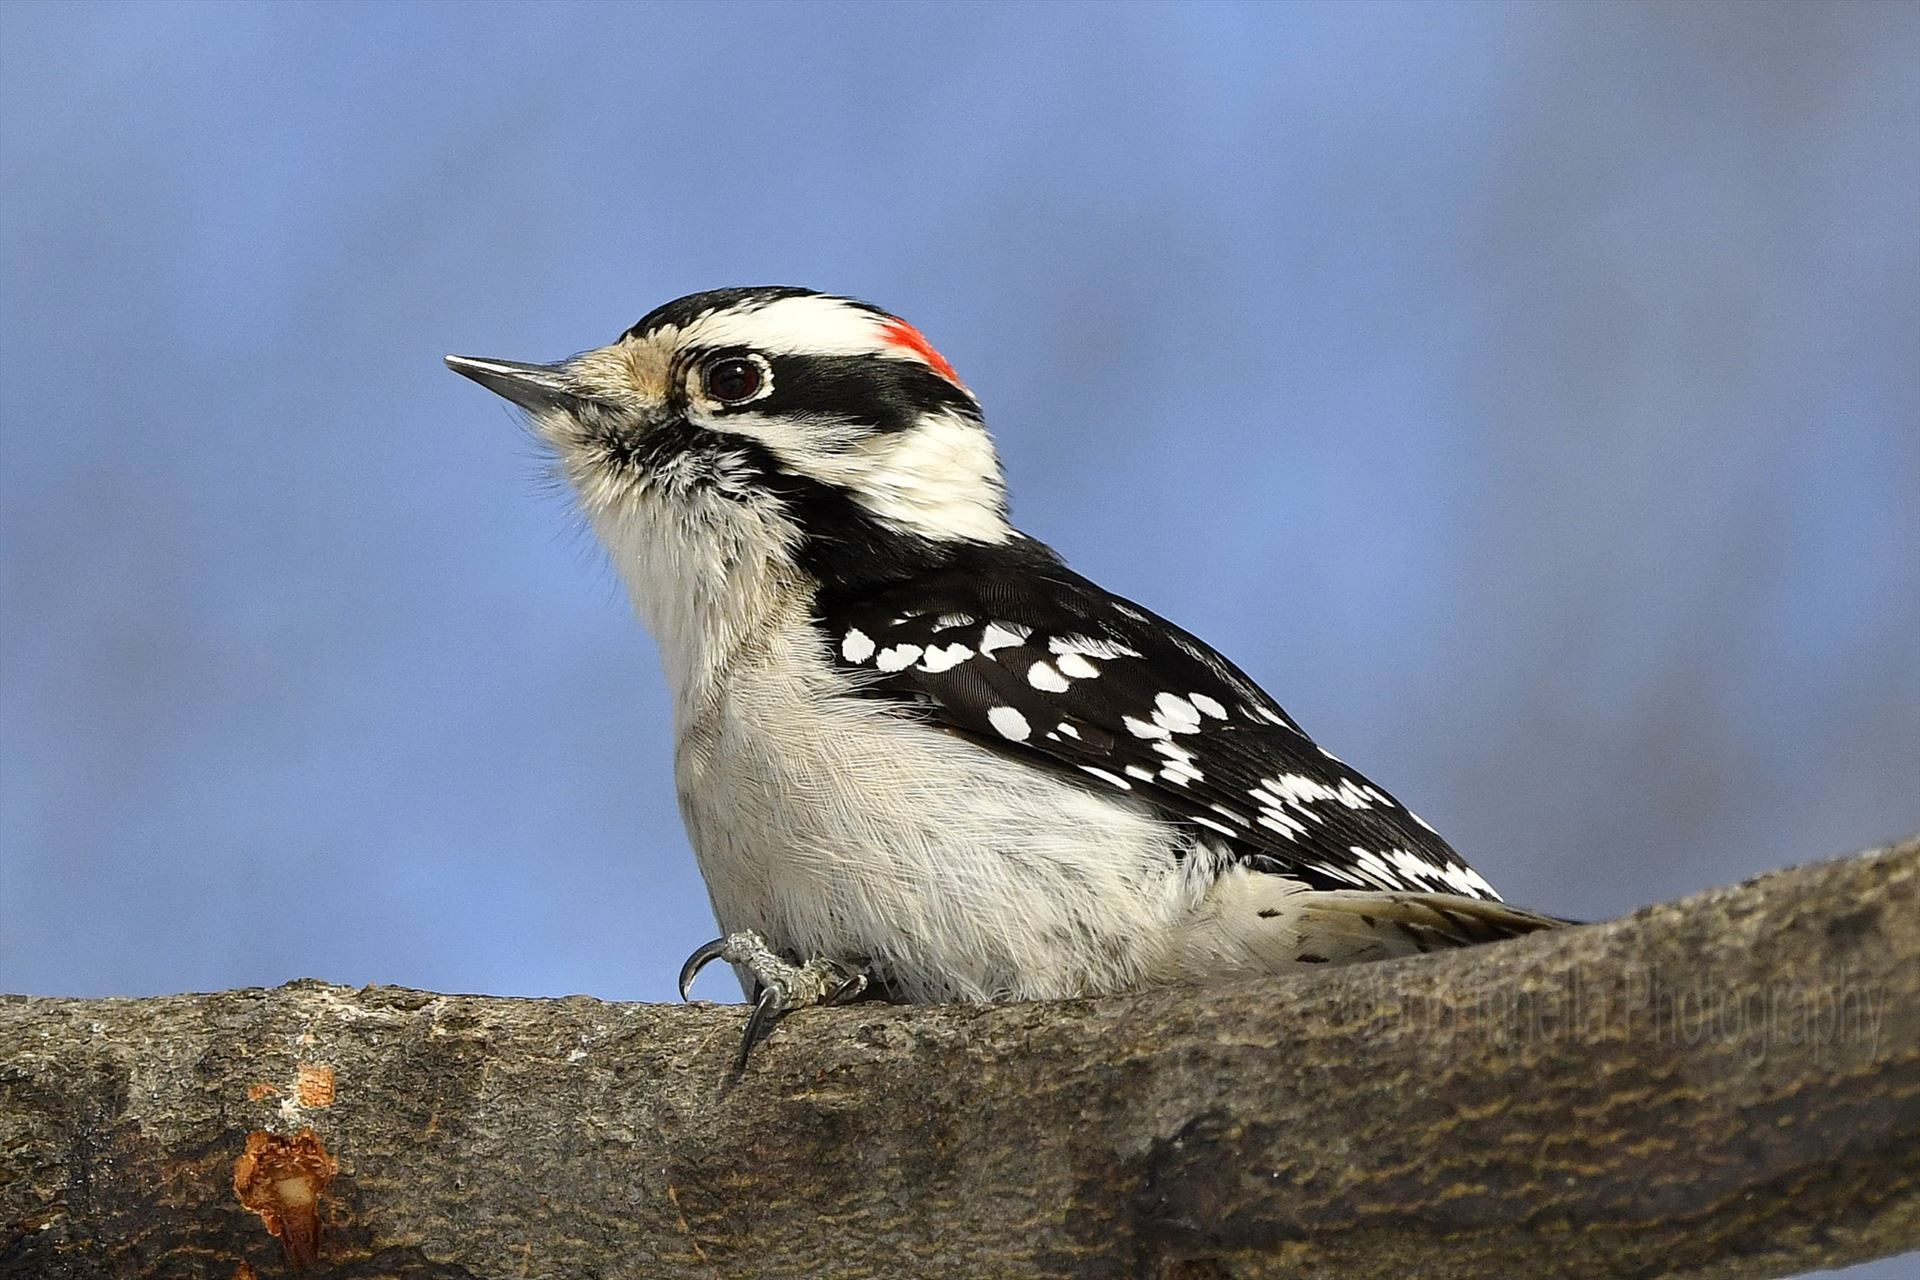 Male Downy Woodpecker2 Male Downy Woodpecker in the Wilds Of Northeast Pa by Buckmaster